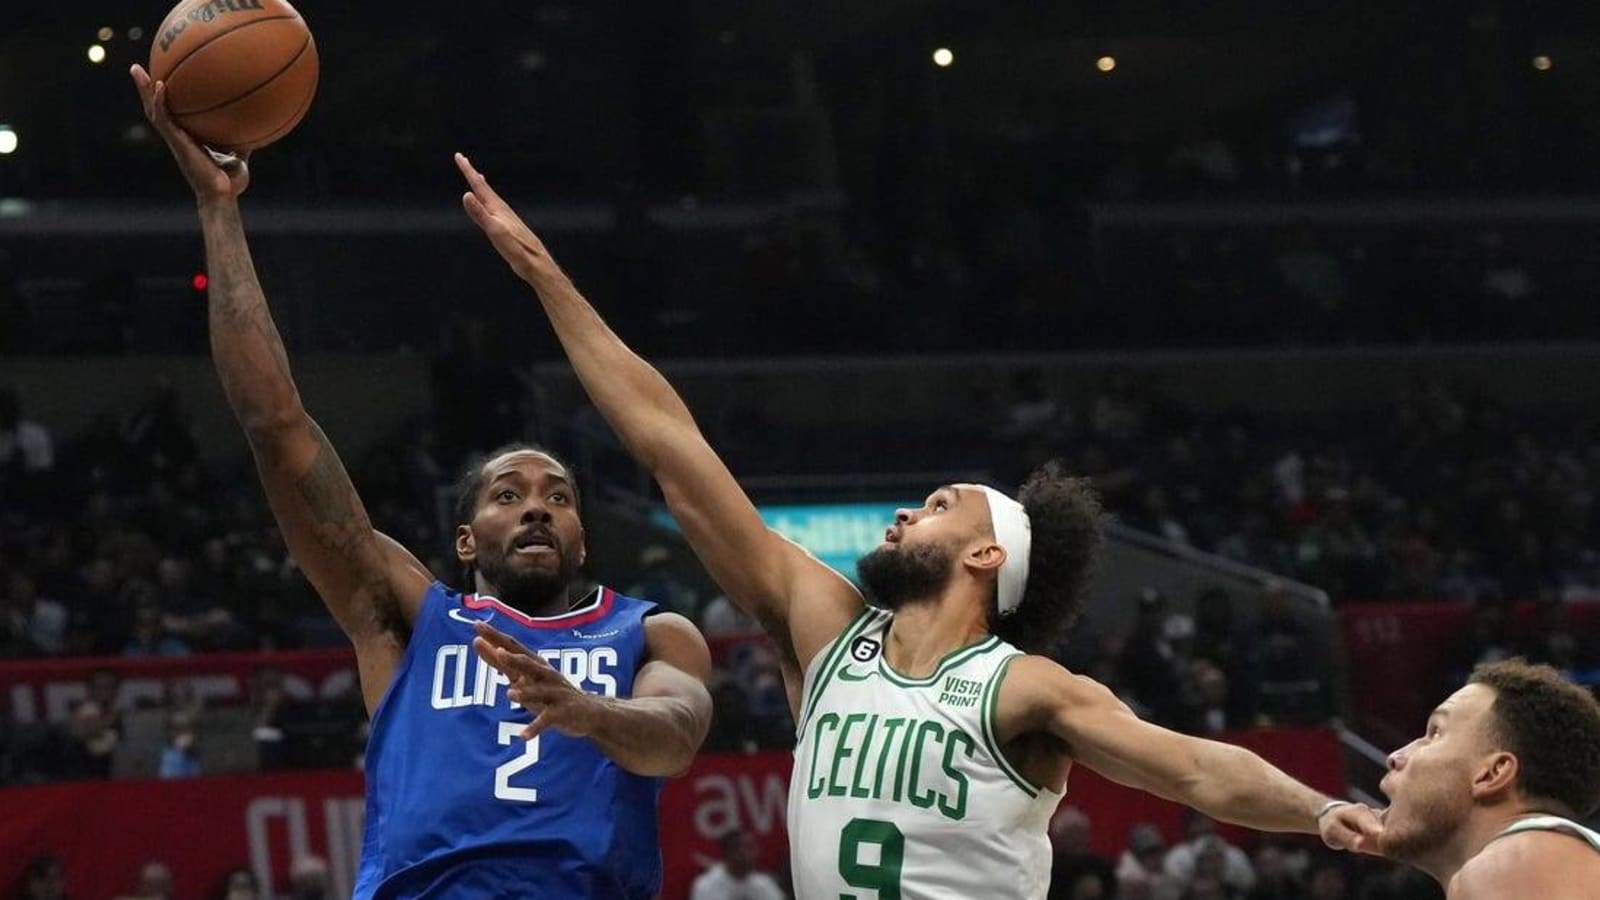 Los Angeles Clippers vs. Boston Celtics preview, prediction, pick for 12/29: Can Clips handle NBA-best Celtics?